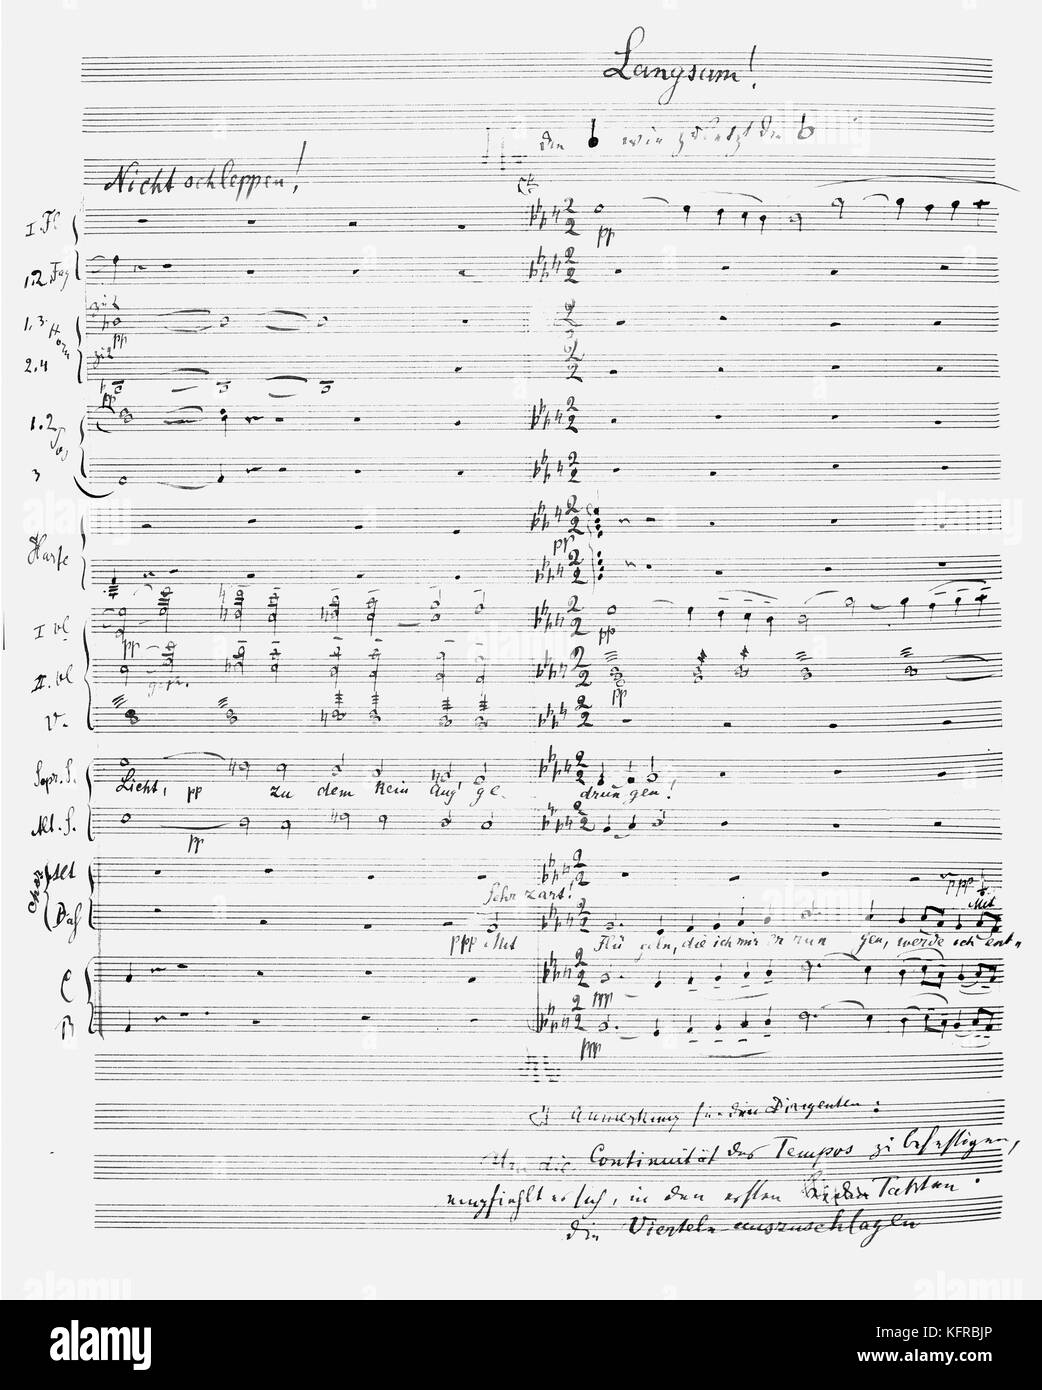 Gustav Mahler, The Resurrection - 5th Movement from the 2nd Symphony, music score with Mahler 's well known notation ' Nicht schleppen! '. GM: Austrian composer, 7 July 1860 - 18 May 1911 Stock Photo